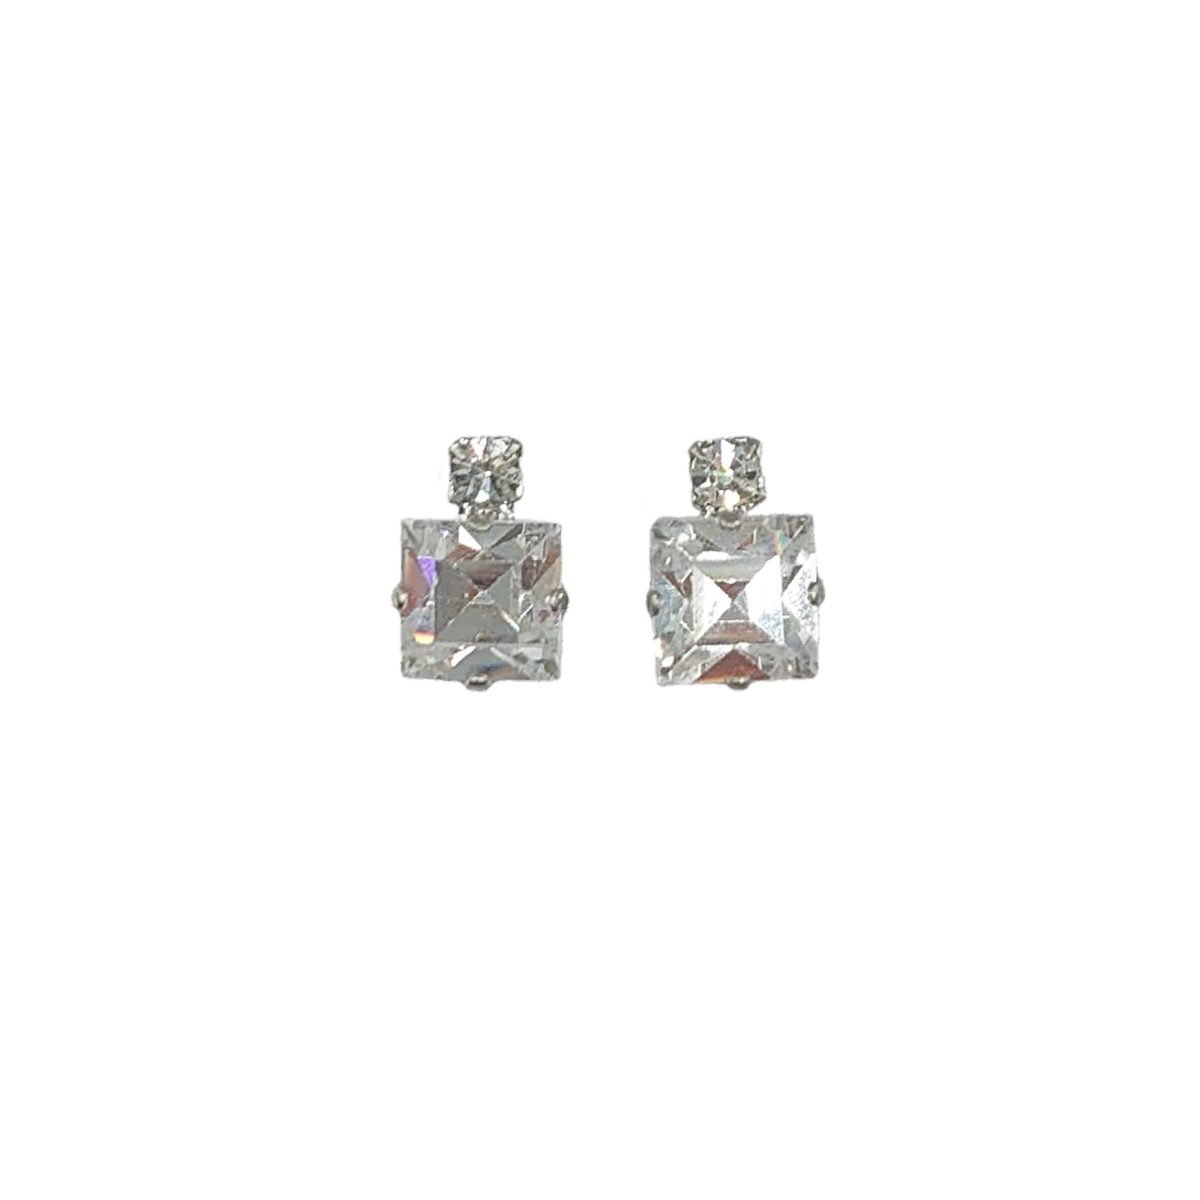 Small Square Earrings - Swarovski Crystals - Silver Fittings